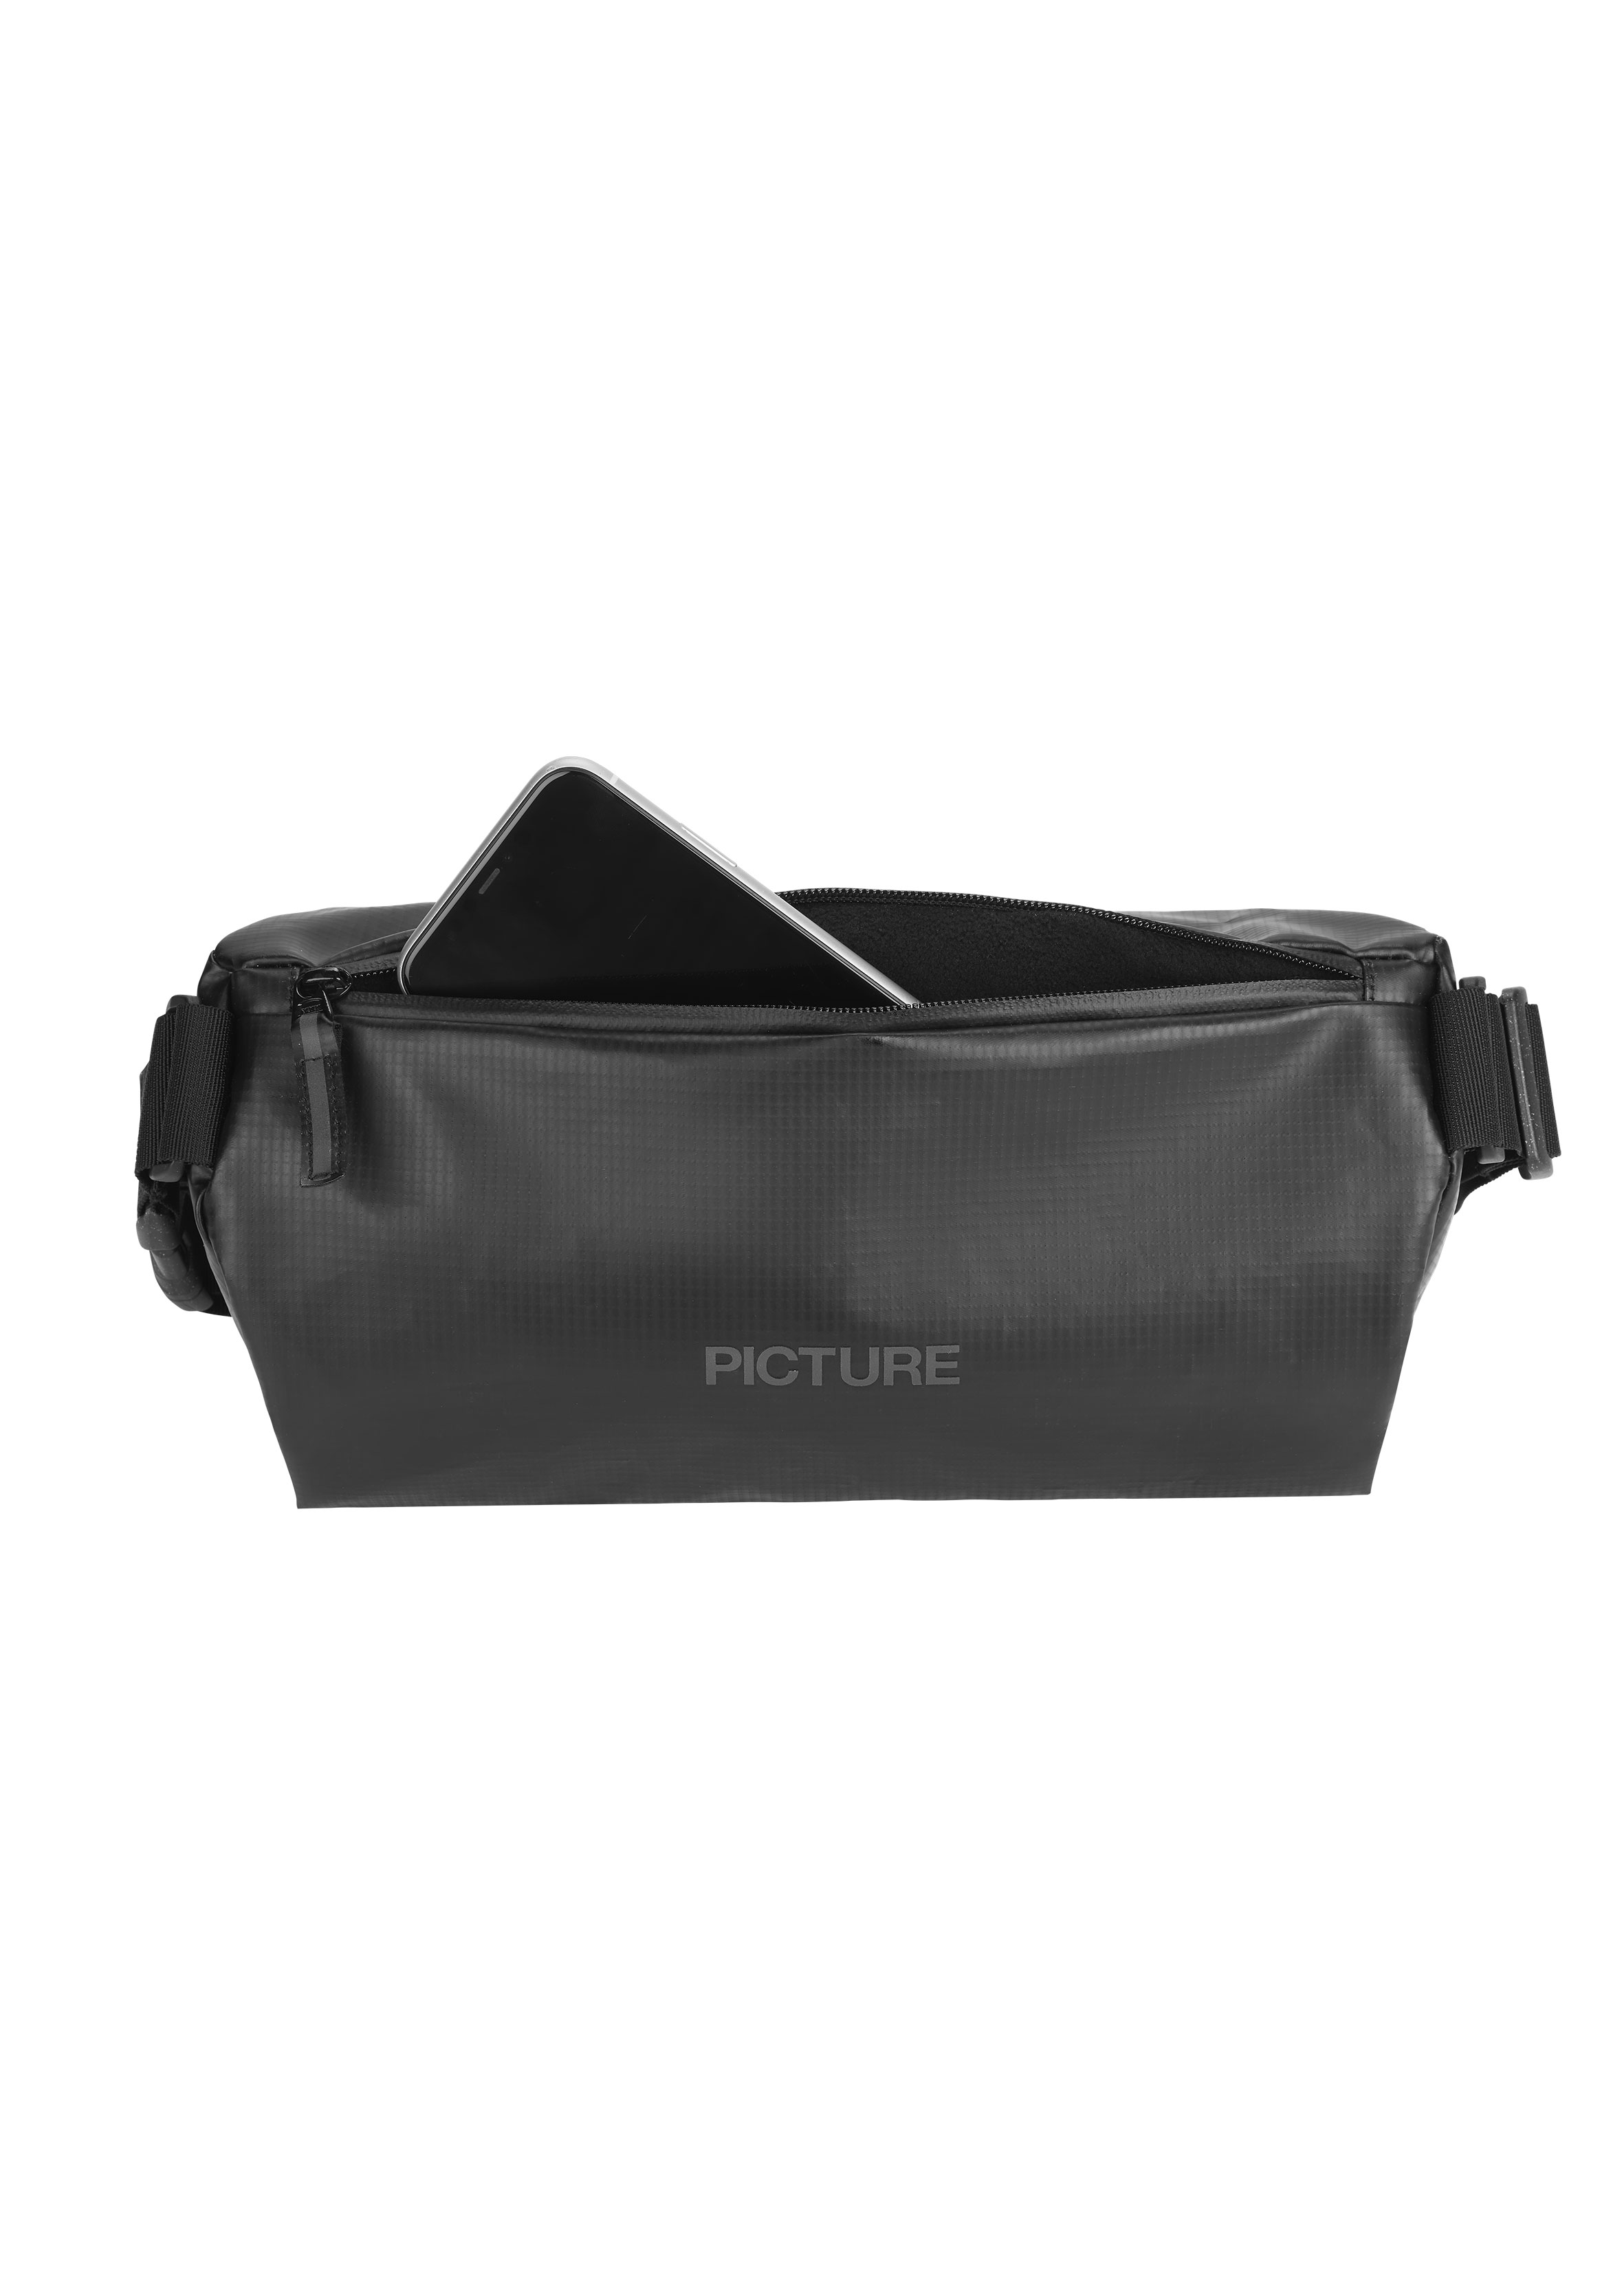 Picture Organic Clothing Outline Waistp Black